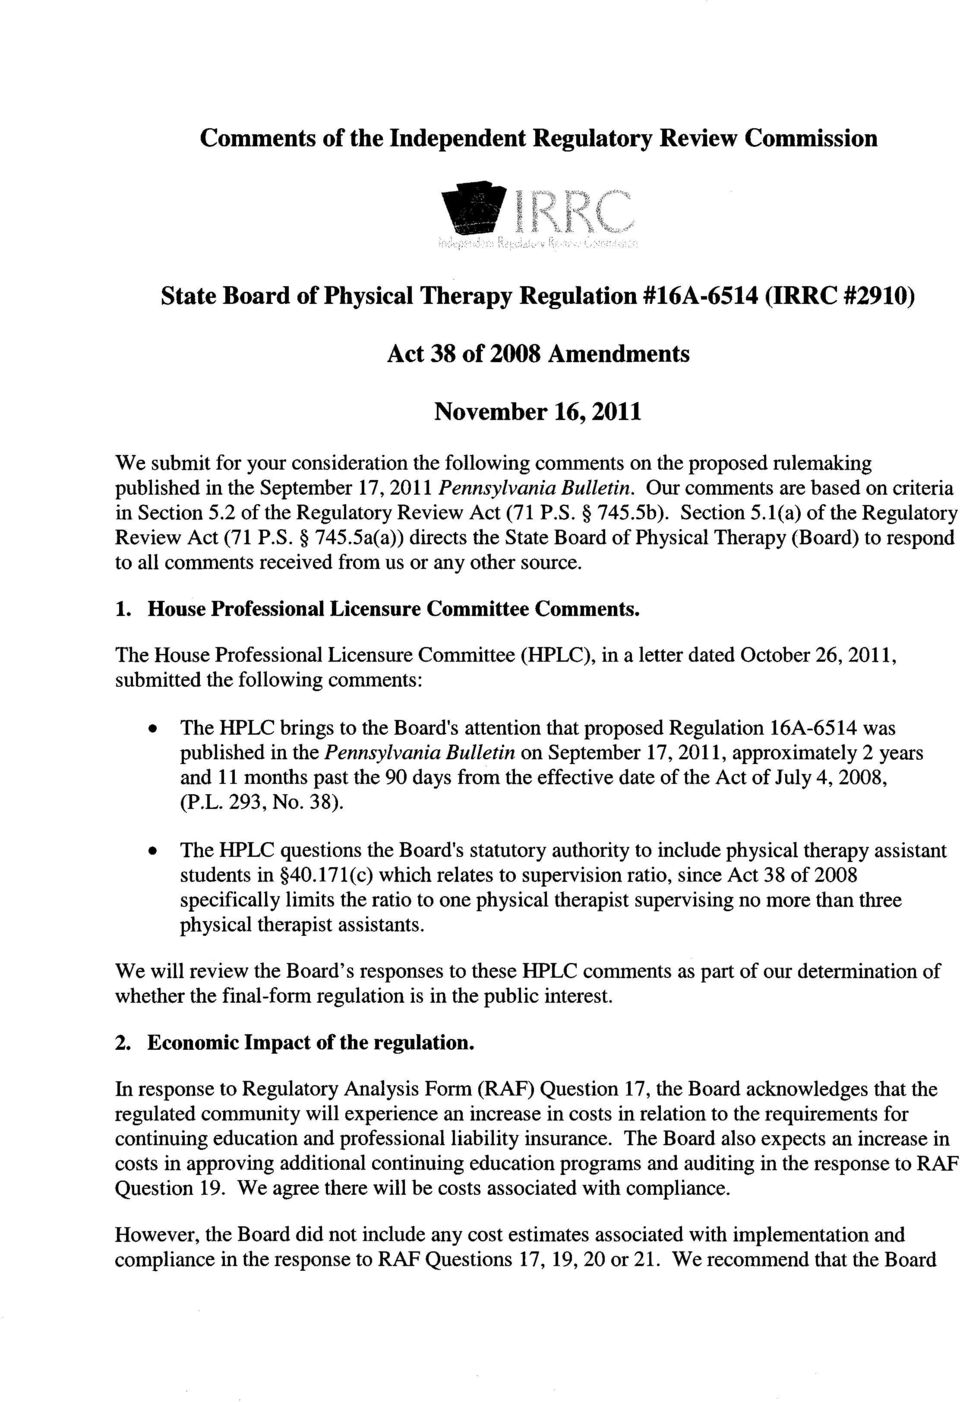 2 of the Regulatory Review Act (71 P.S. 745.5b). Section 5.1(a) of the Regulatory Review Act (71 P.S. 745.5a(a)) directs the State Board of Physical Therapy (Board) to respond to all comments received from us or any other source.